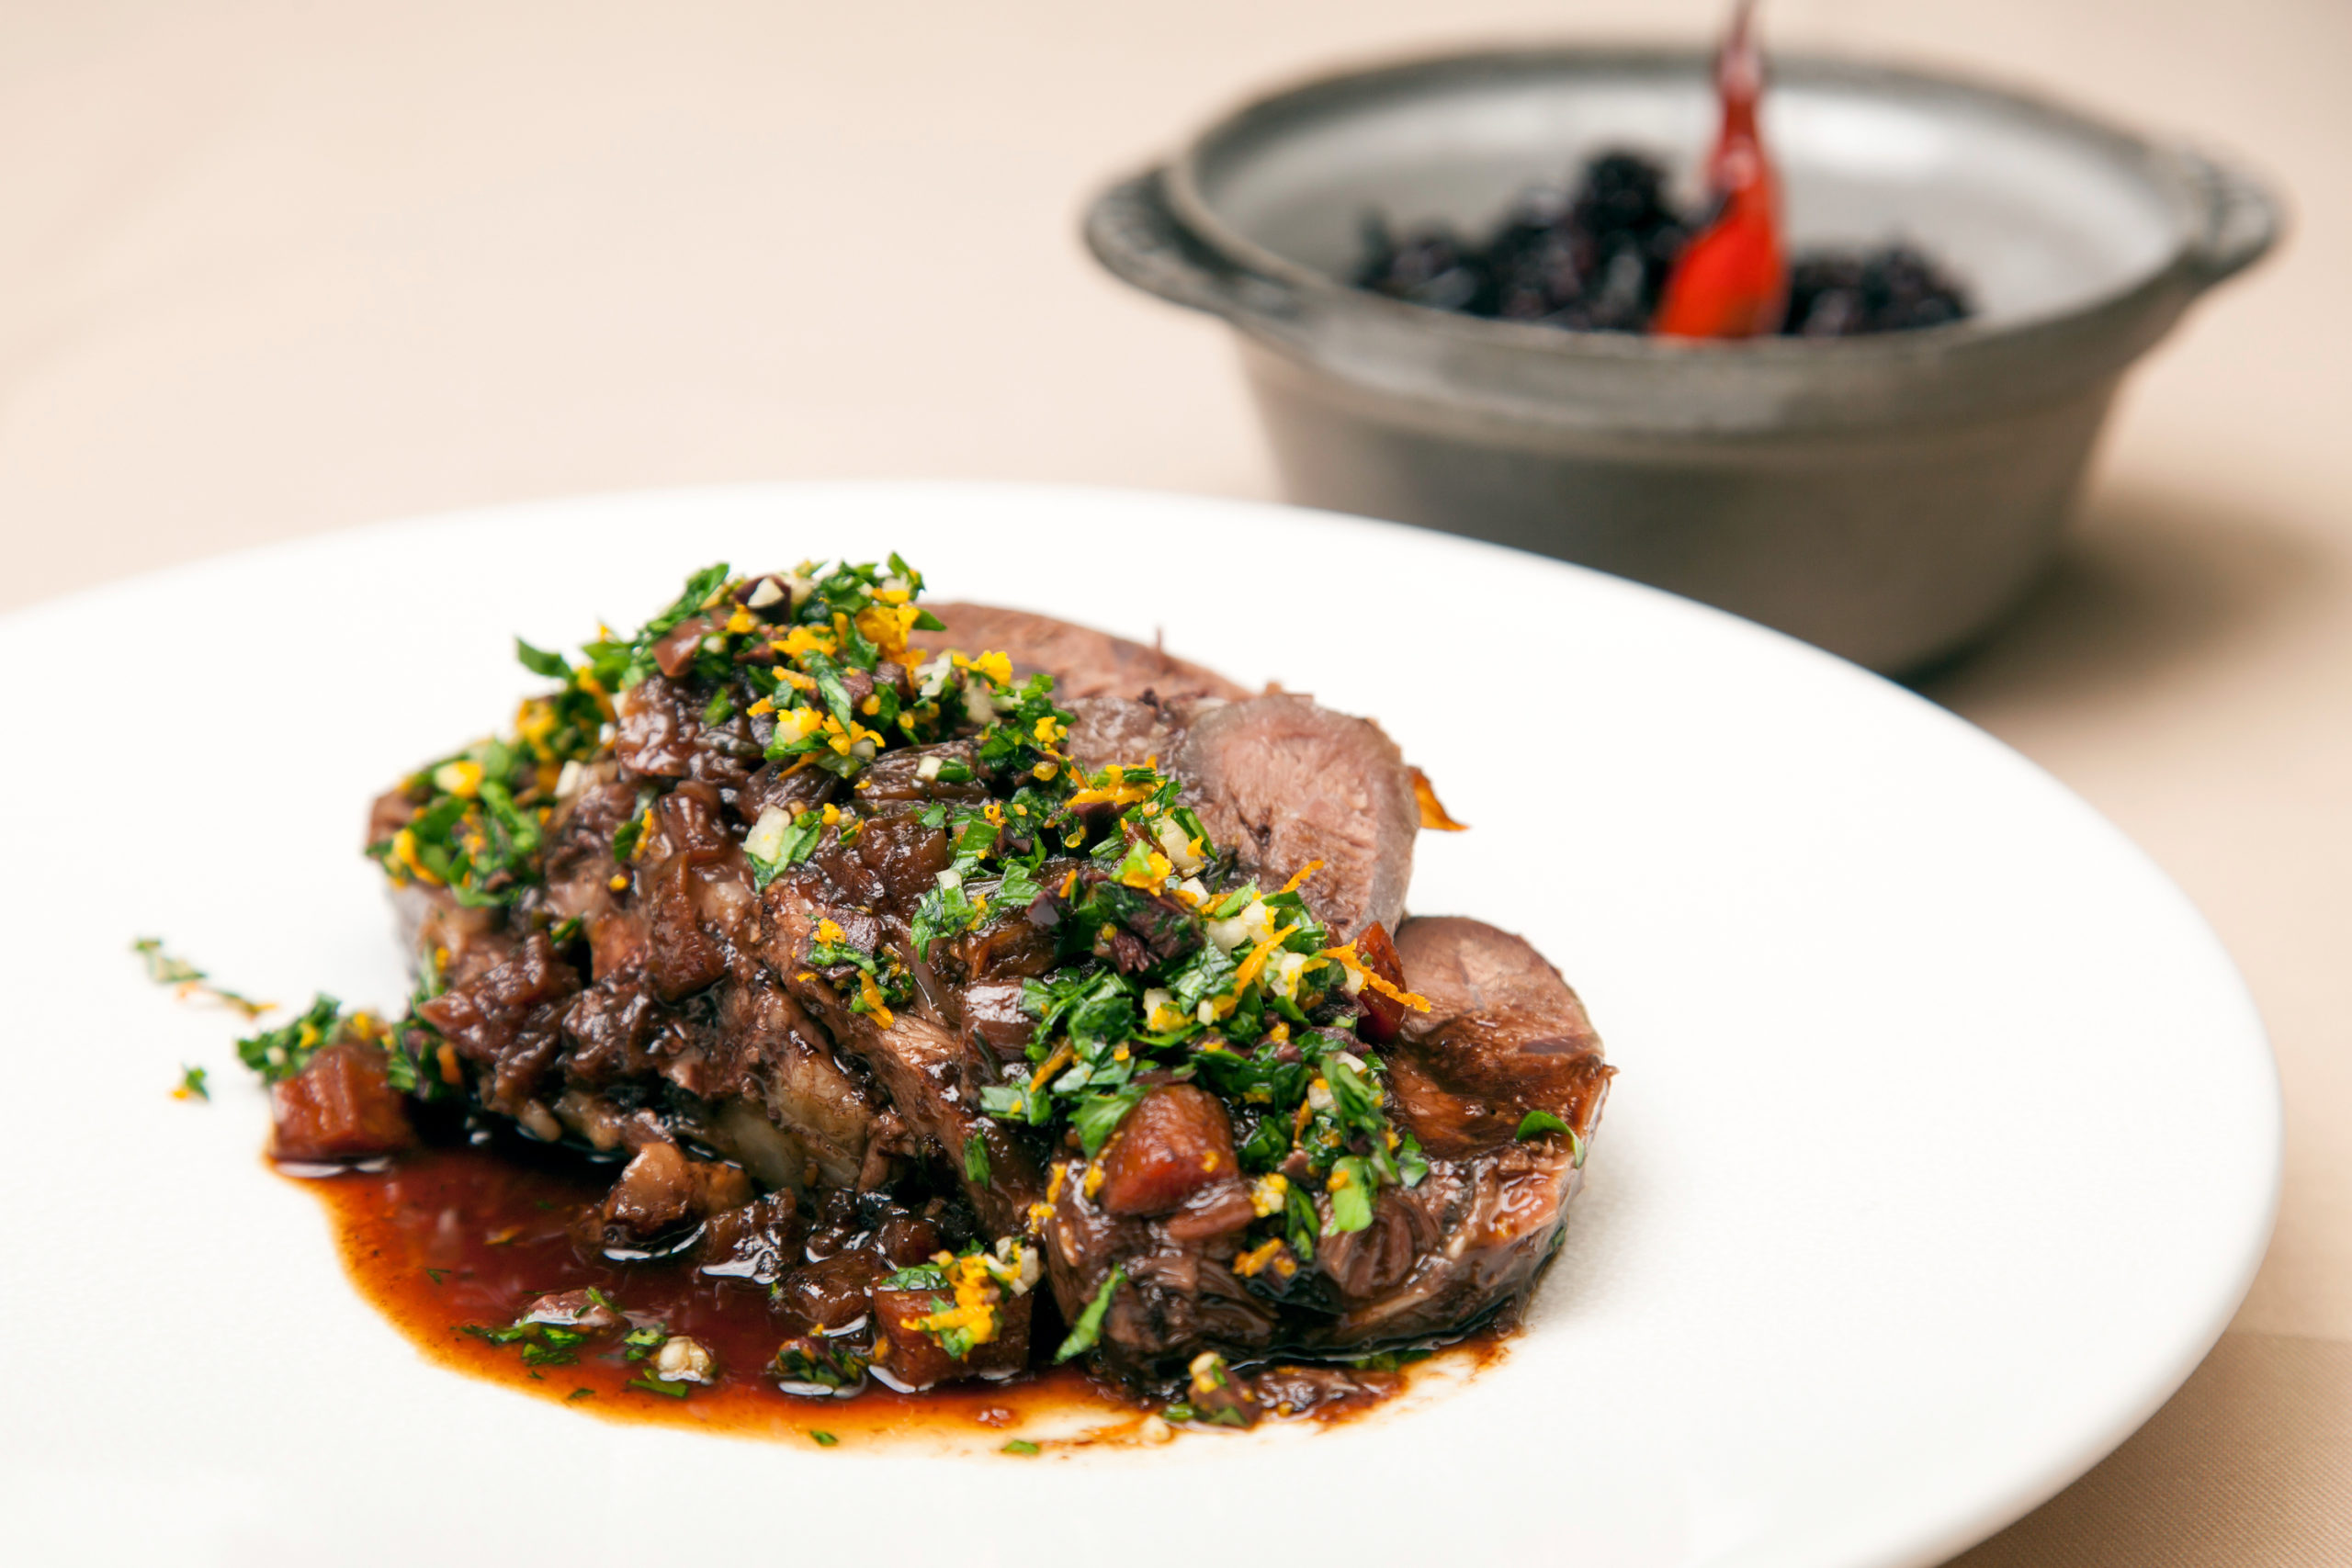 Braised Whole Beef Shin with Gremolata